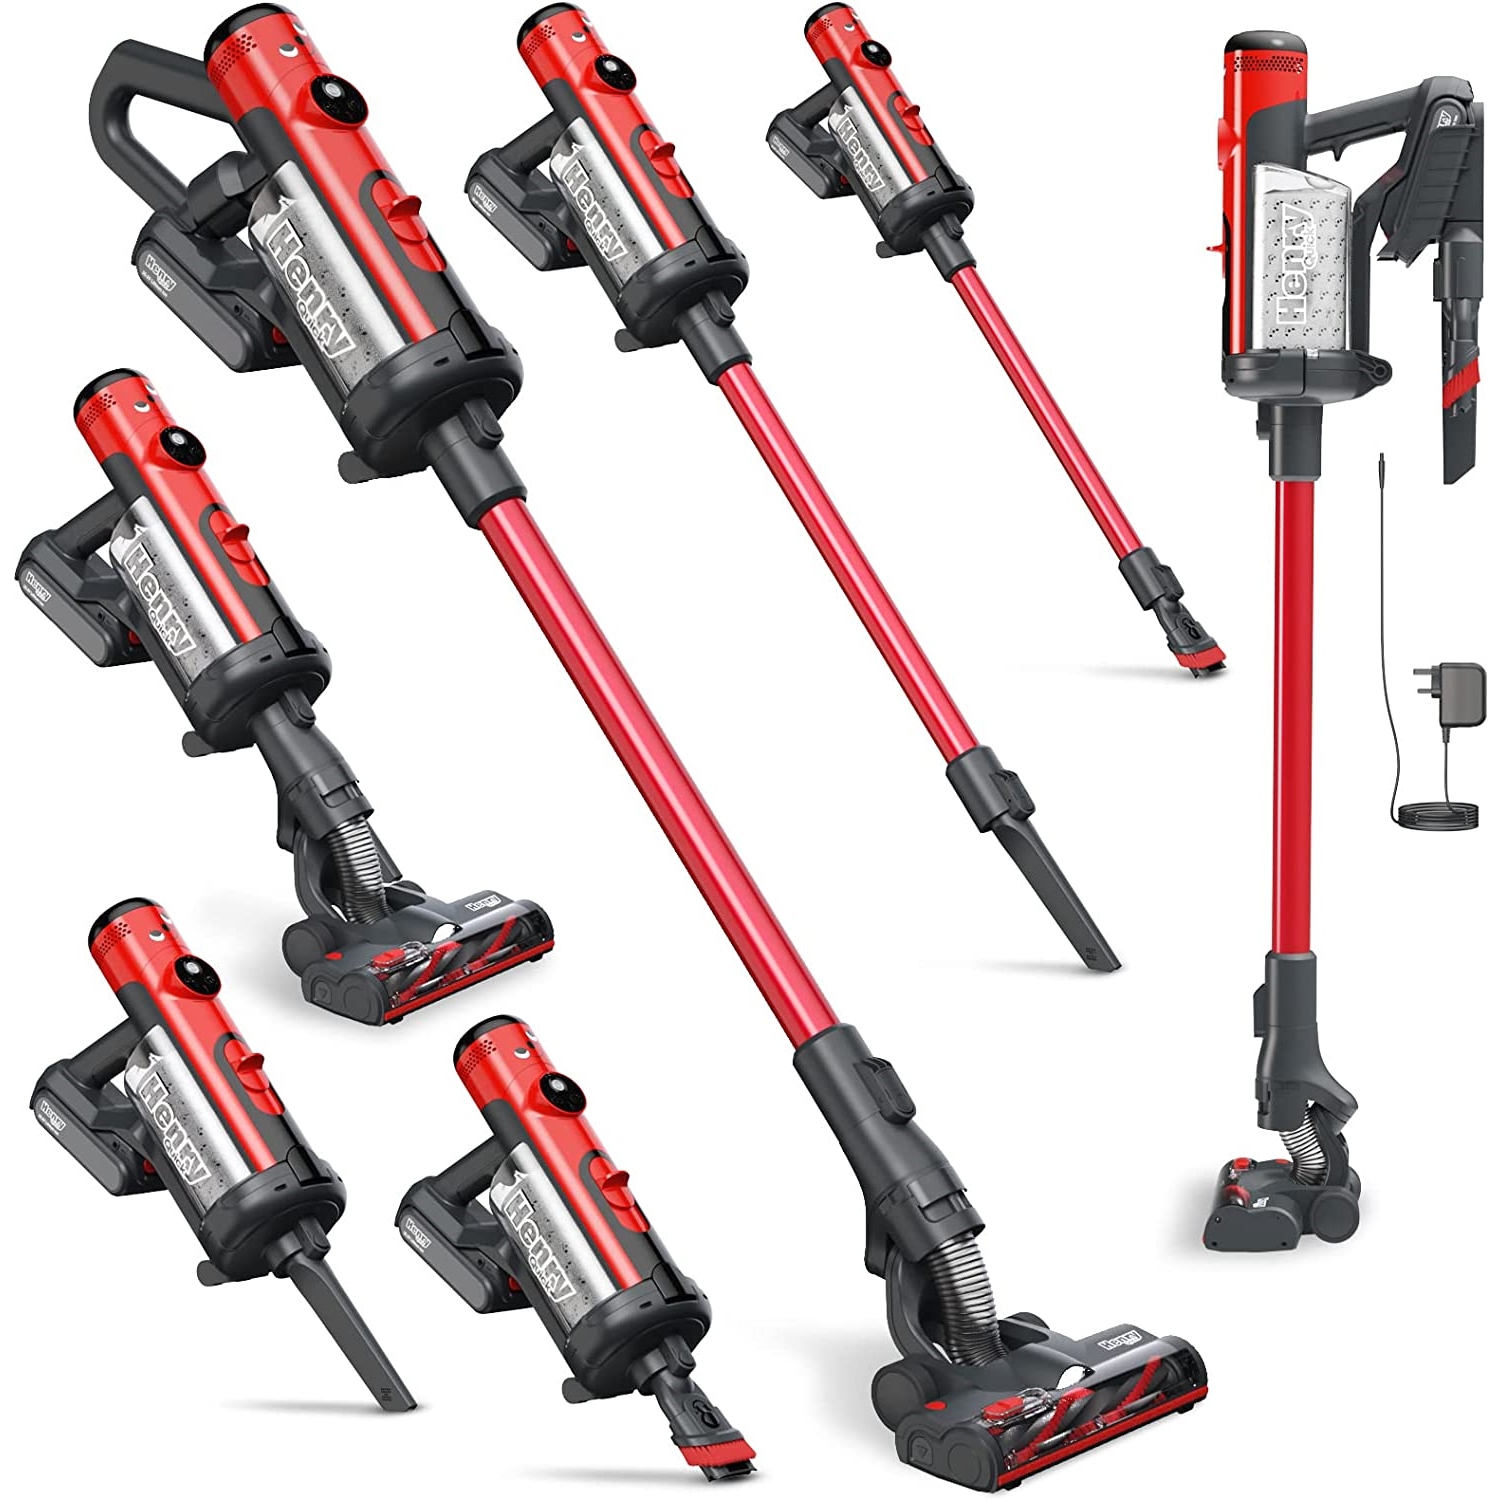 Henry Quick review: is the cordless version of the cult vacuum